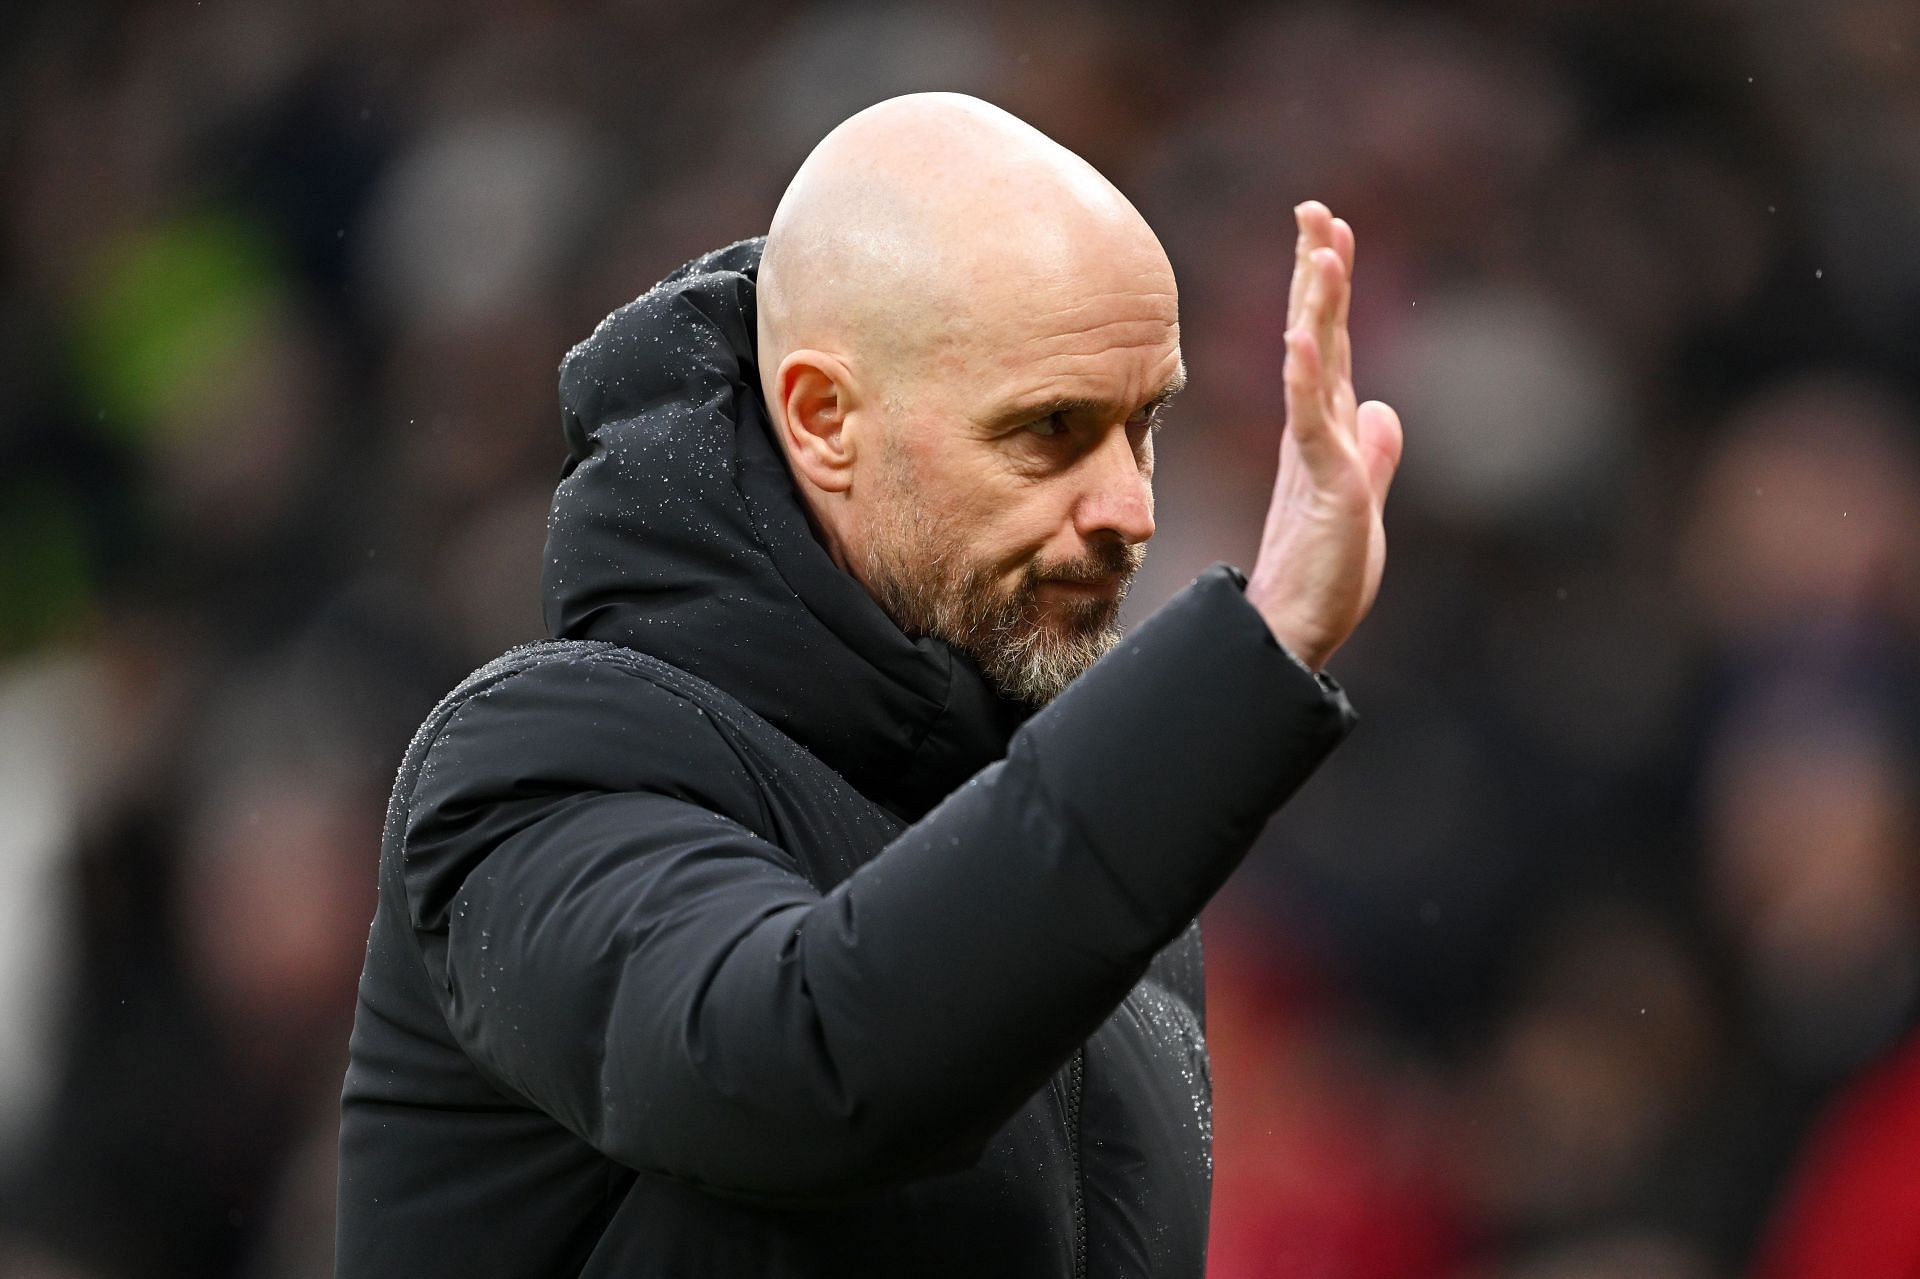 Manchester United draw up new shortlist with 2 former Chelsea managers as they hunt for Erik ten Hag replacement - Reports